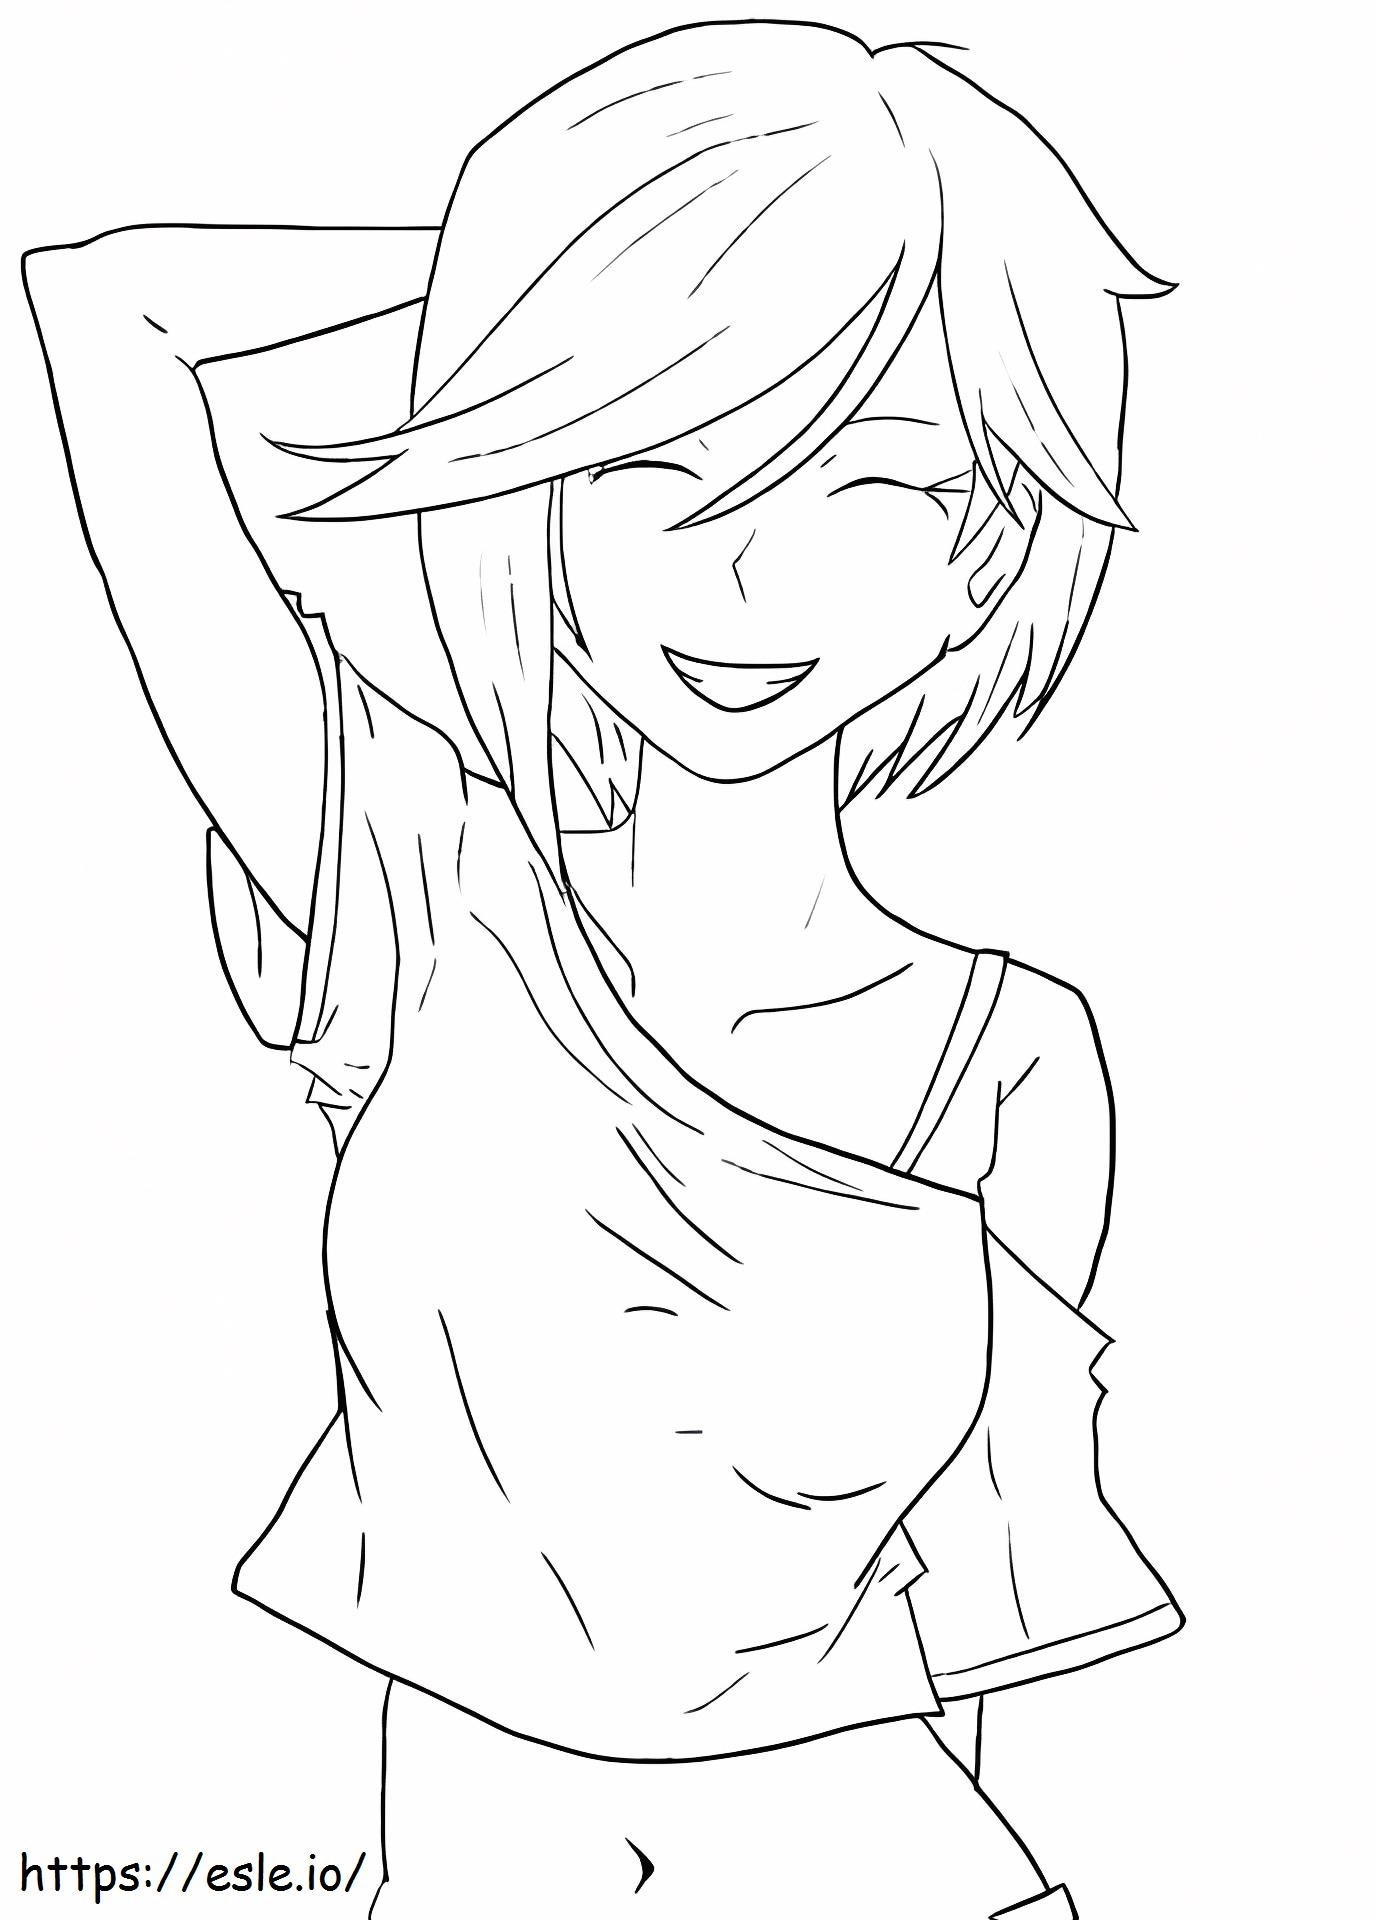 Smiling Face Anime Girl coloring page